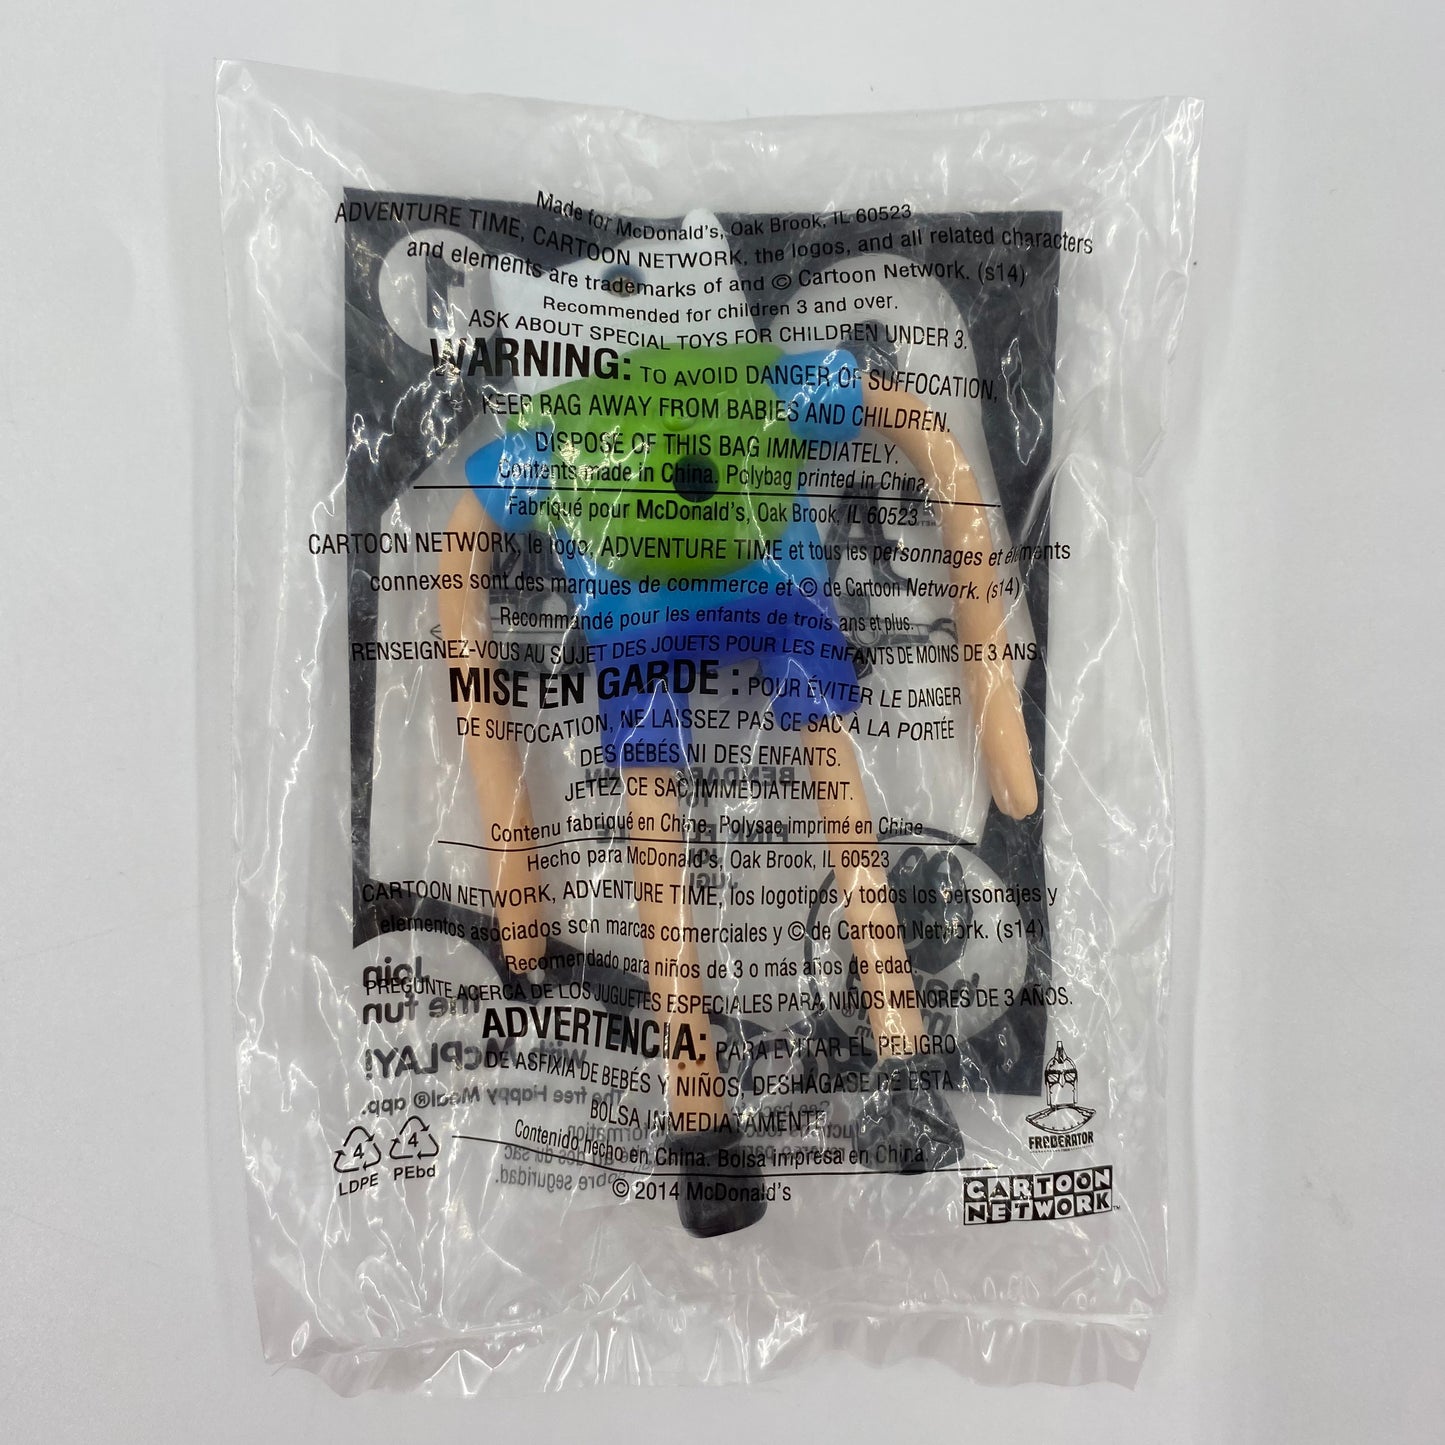 Adventure Time Bendable Finn McDonald's Happy Meal toy (2014) bagged